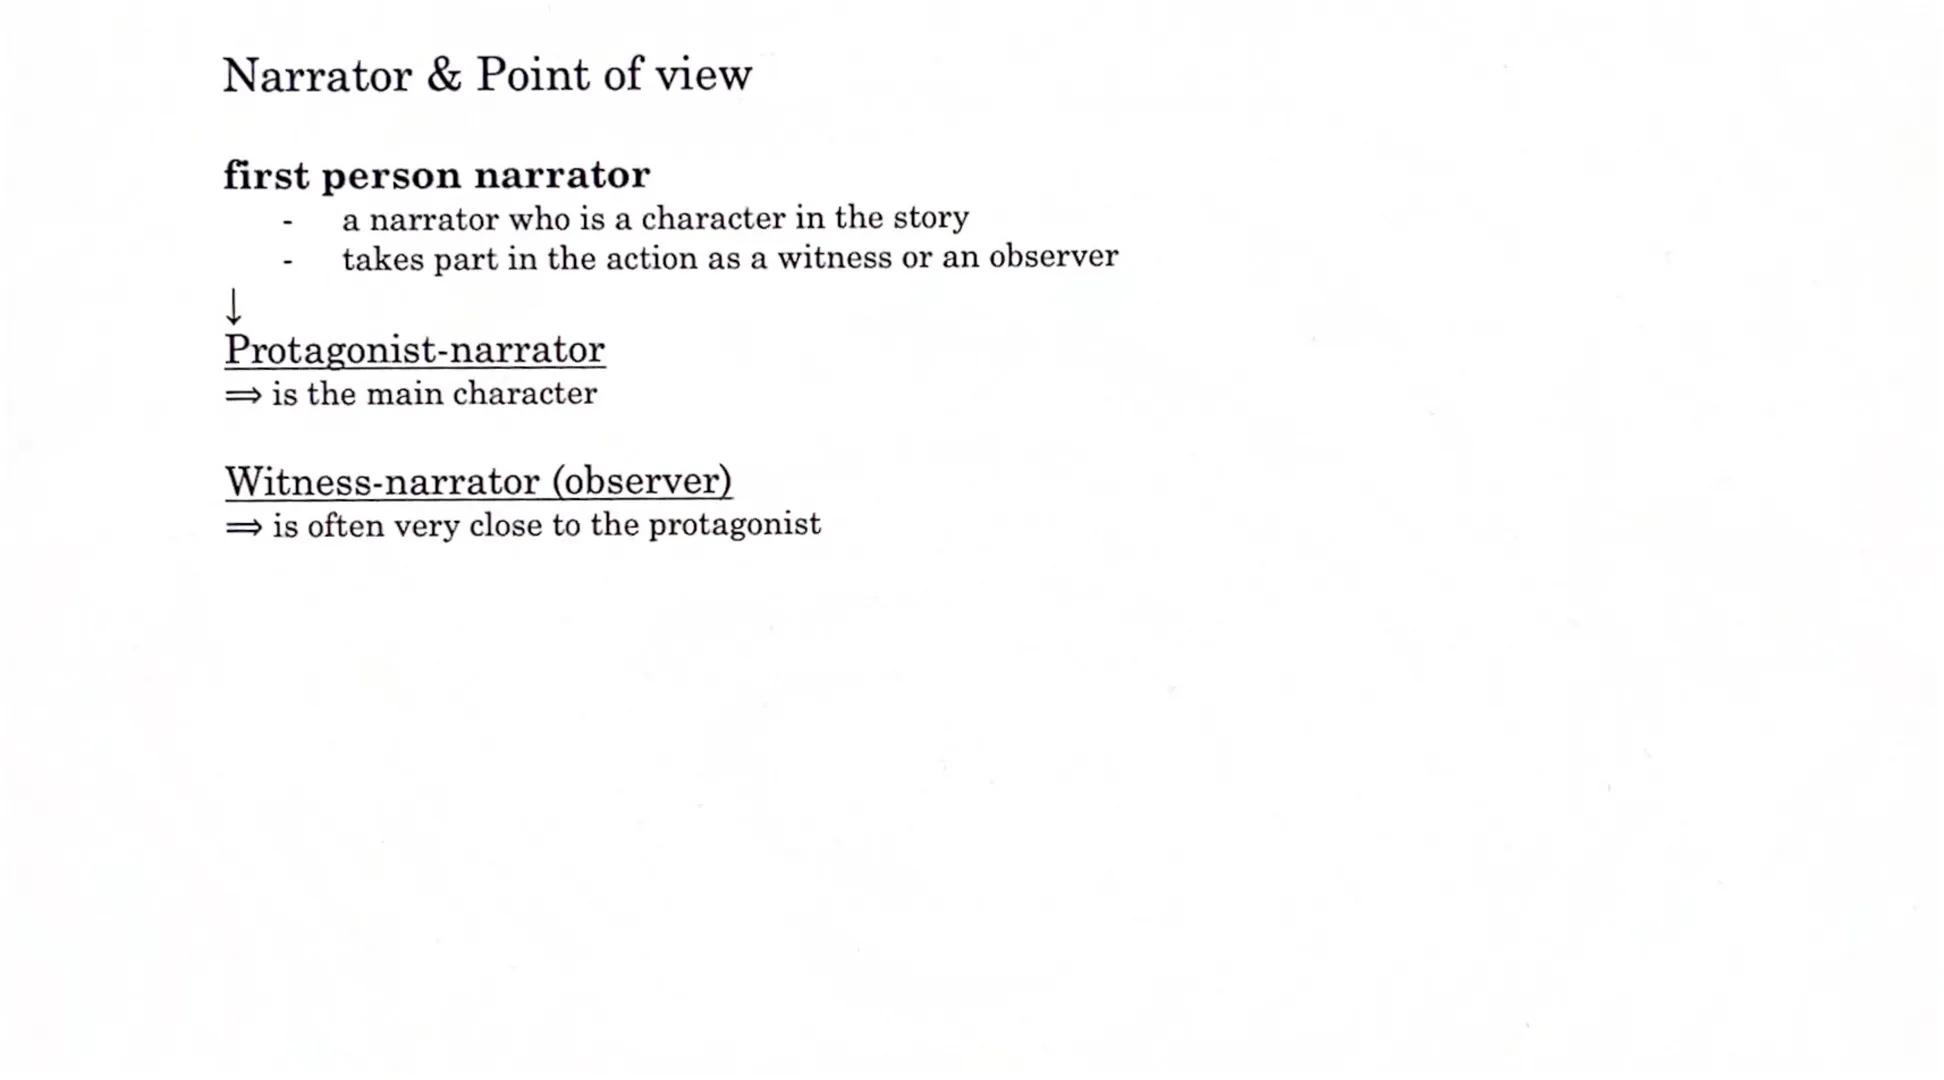 Narrator & Point of view
first person narrator
↓
a narrator who is a character in the story
takes part in the action as a witness or an obse